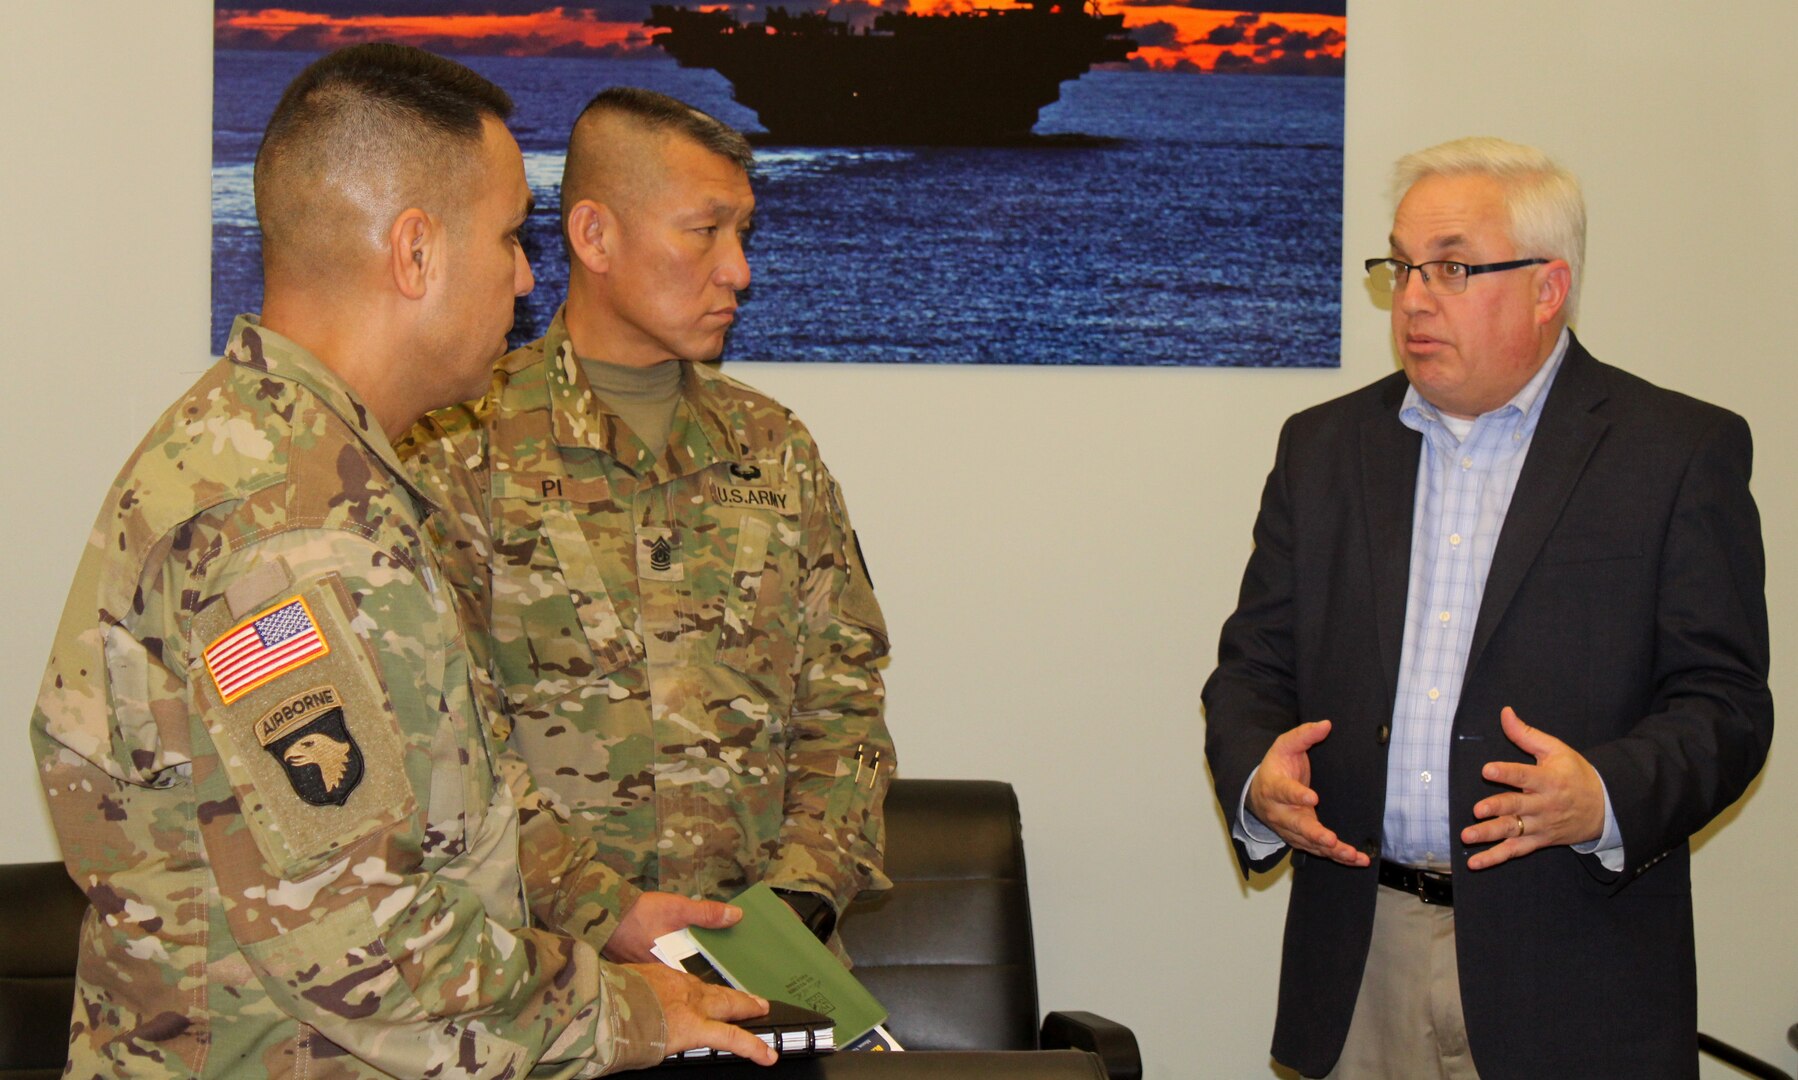 Army Sgt. Majs. Marco Torres, left, and Fu Pi, center, listen as DLA Troop Support Industrial Hardware Director of Supplier Operations Gary Shifton explains IH’s role in tracking Army ground forces readiness drivers Jan. 10, 2020, in Philadelphia.